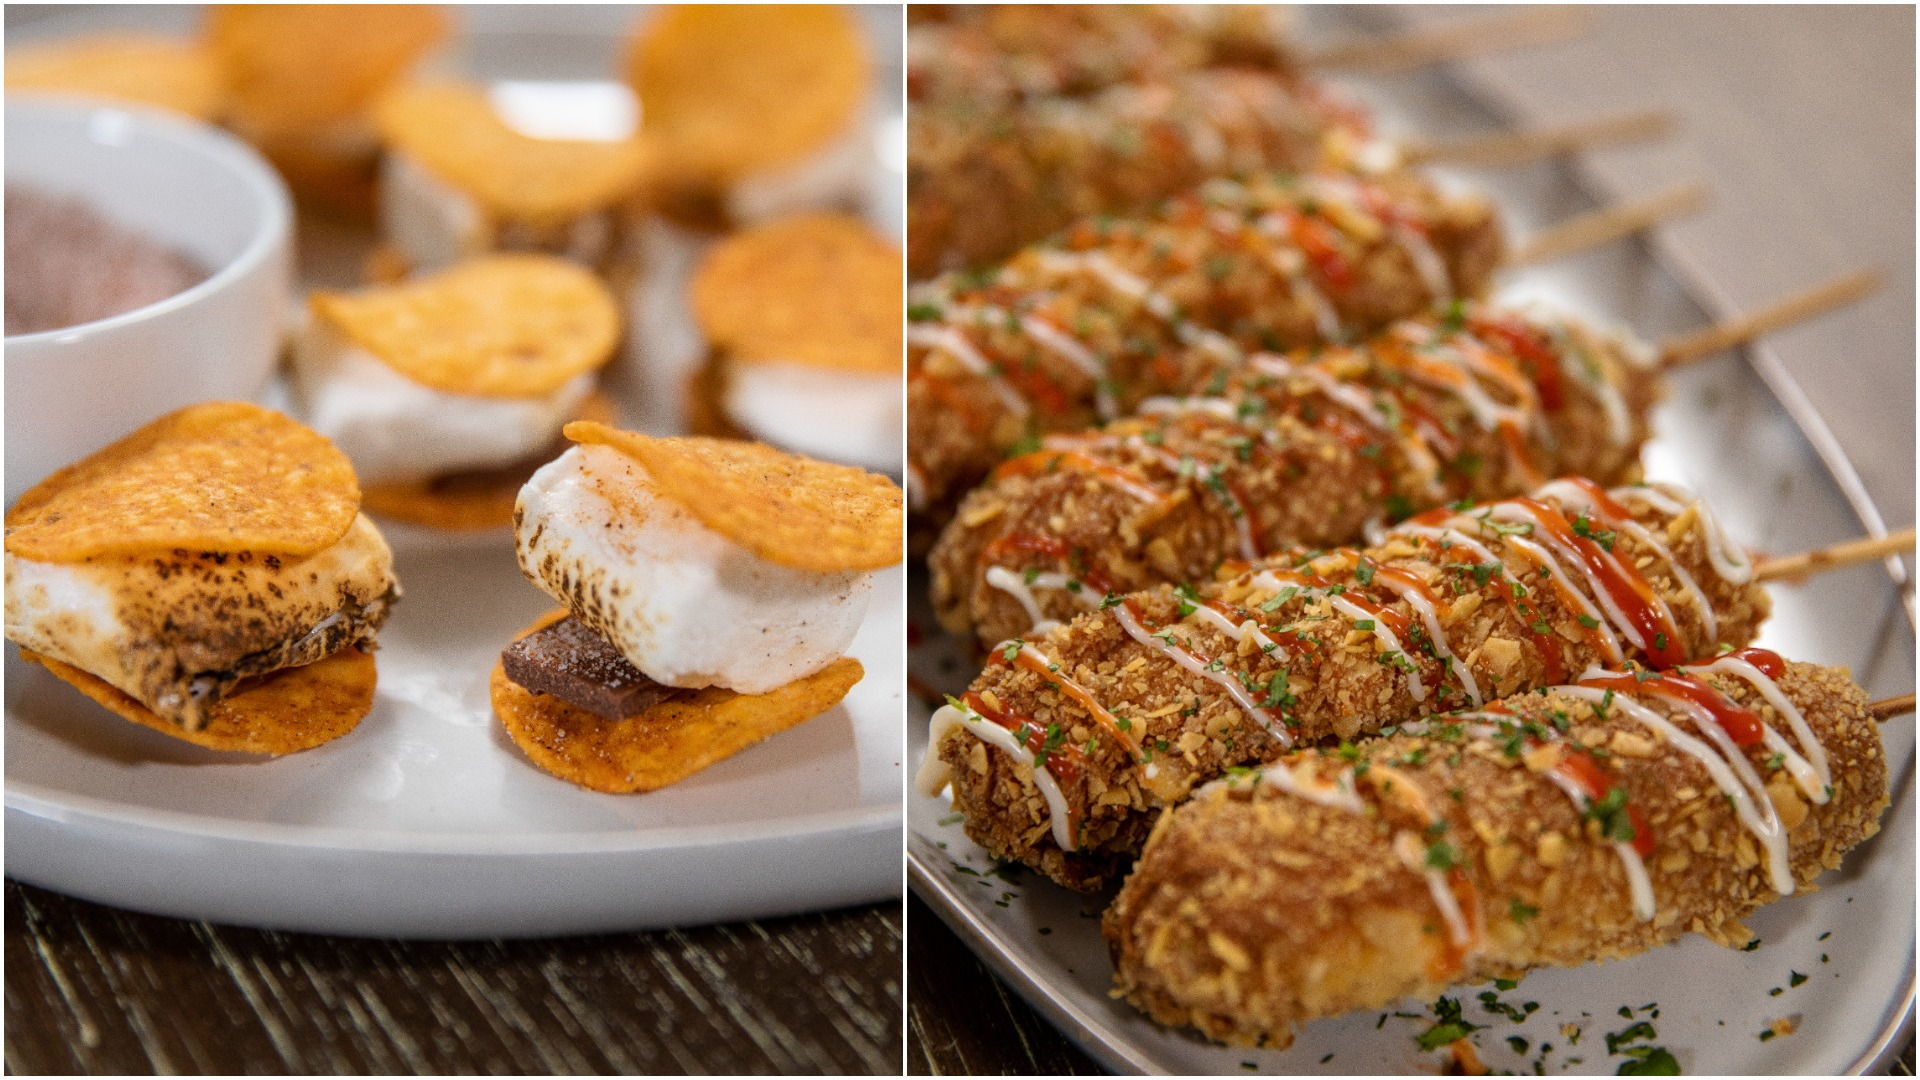 Left: Spicy Tostitos s'mores; Right: Tostitos-crusted corn dog [images provided by Frito-Lay]